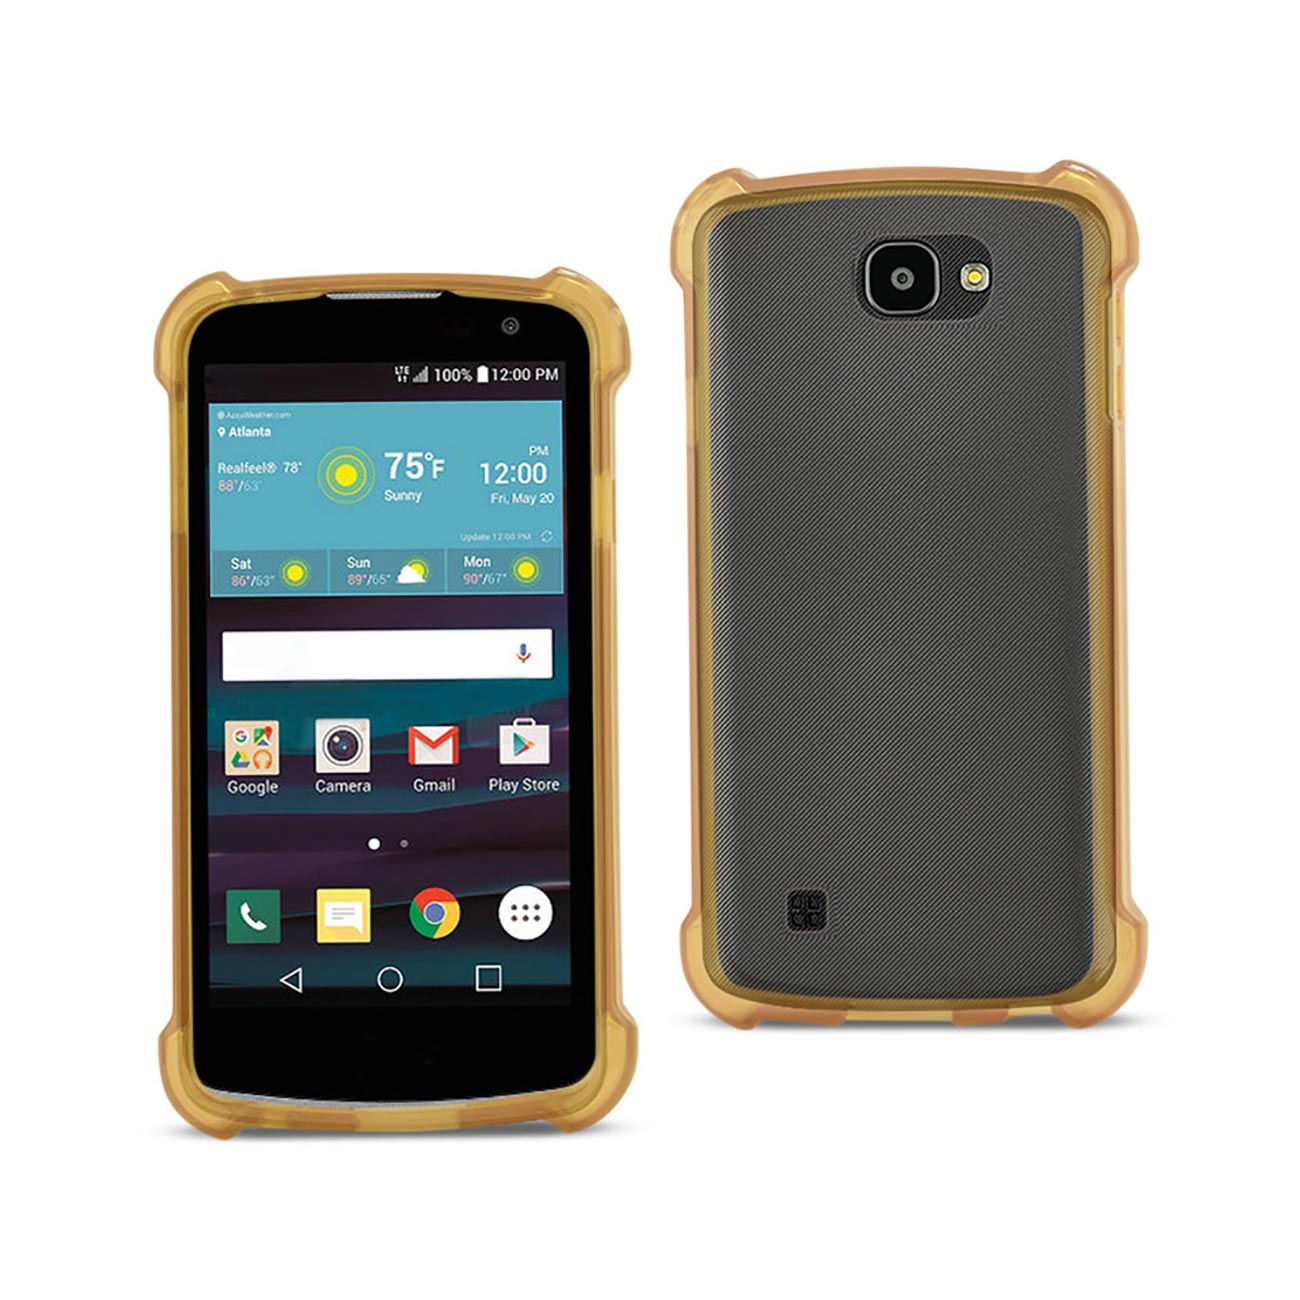 Case Clear Bumper Air Cushion Protection LG Spree Gold Color